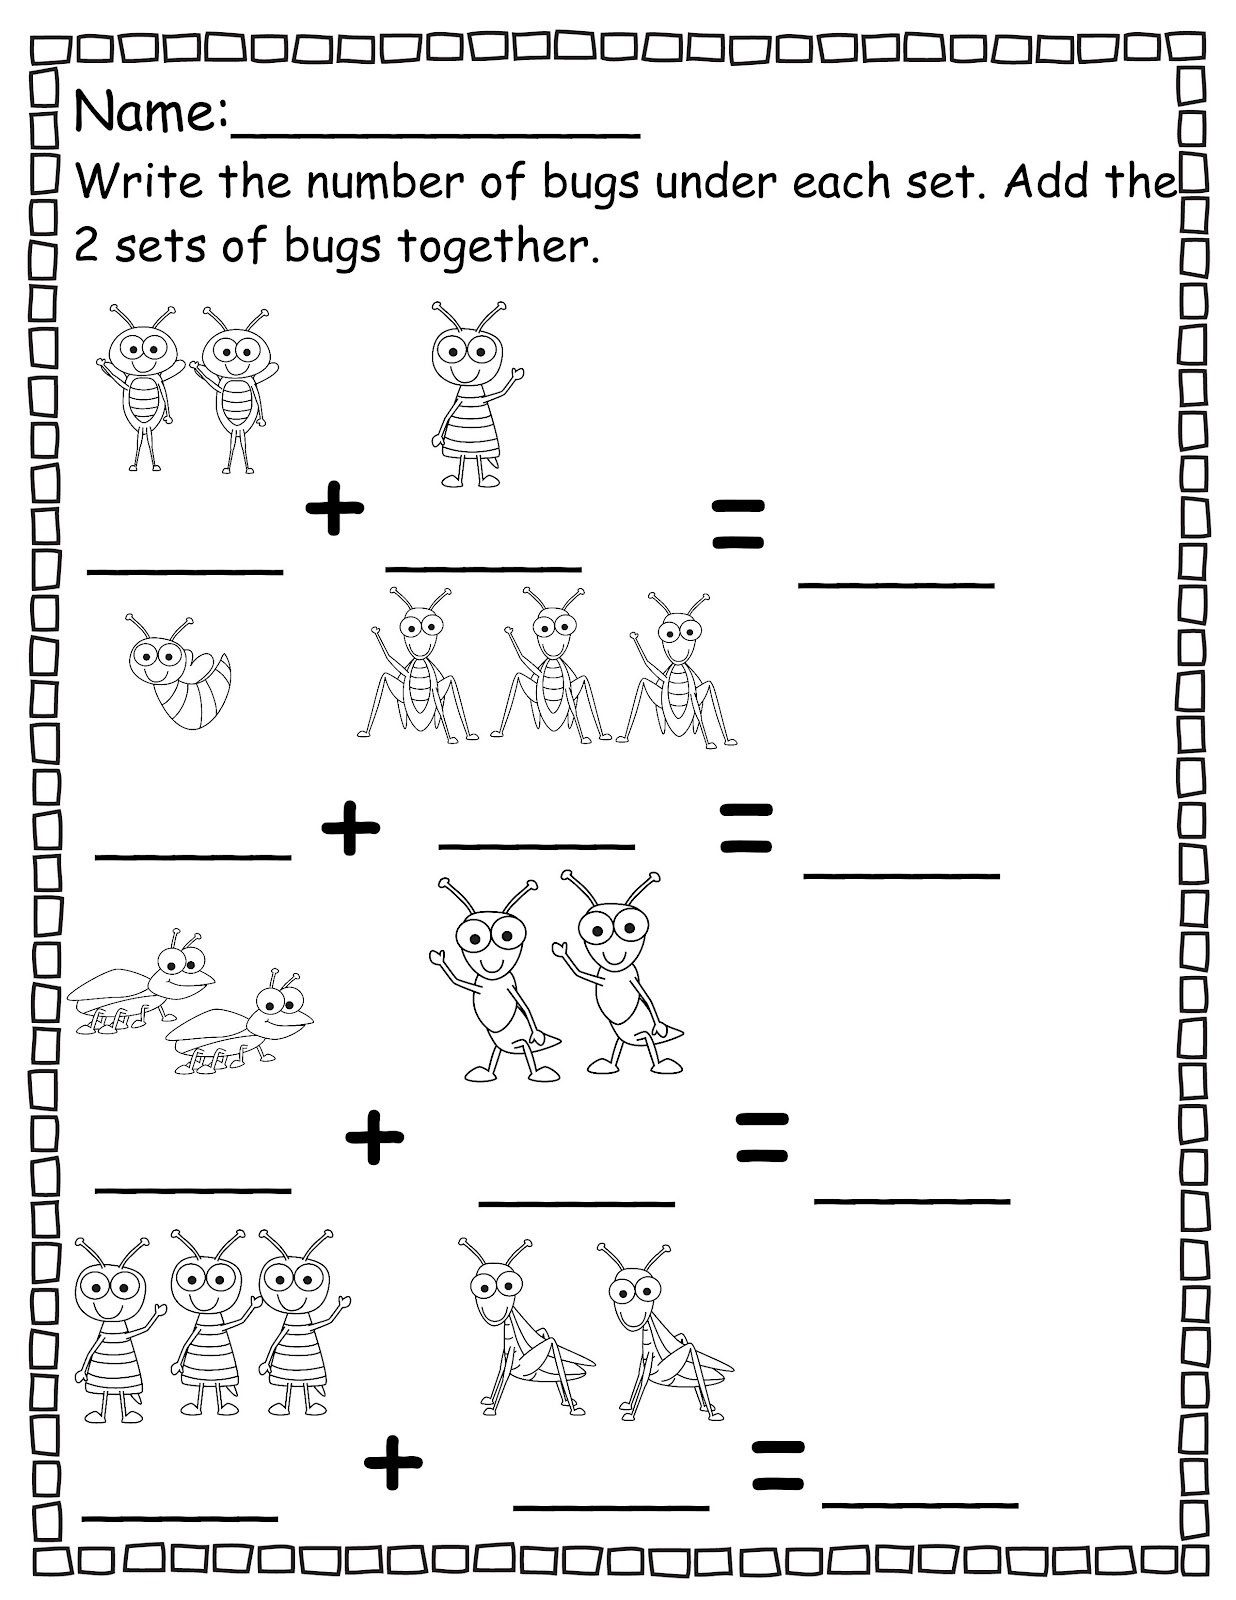 Free Abc Worksheets For Pre K Activity Shelter Free Abc Worksheets For Pre K Activity Shelter 